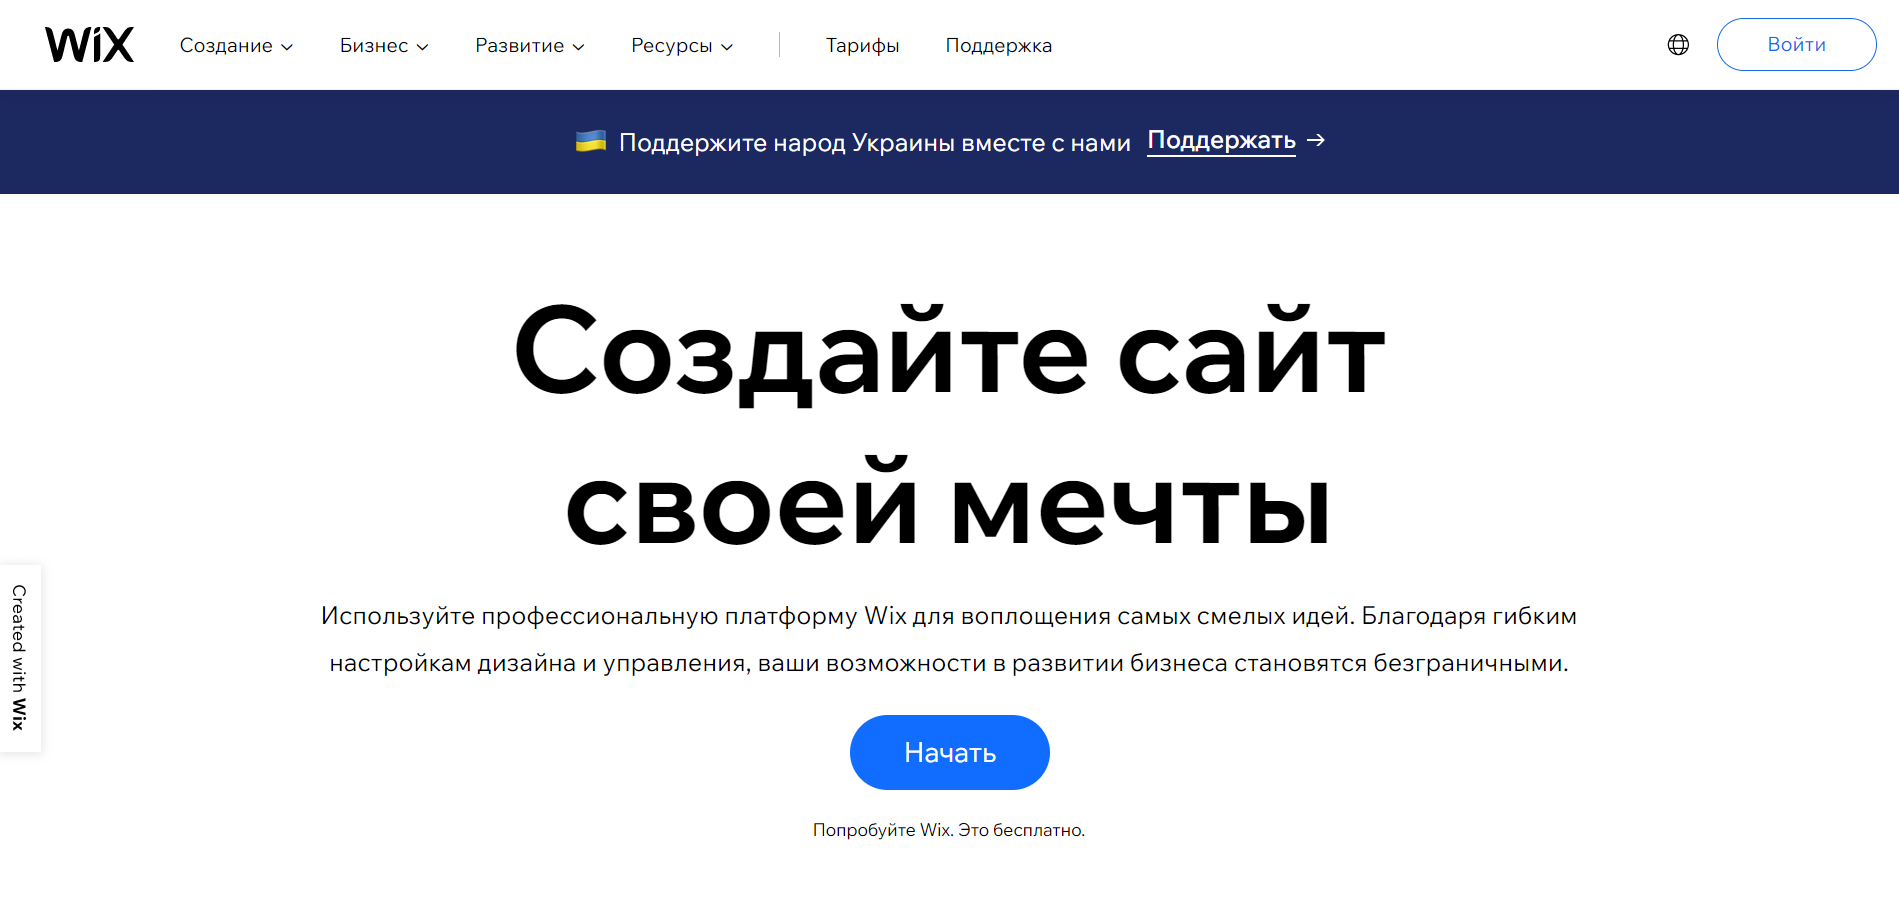 How to open a Wix site in Russia